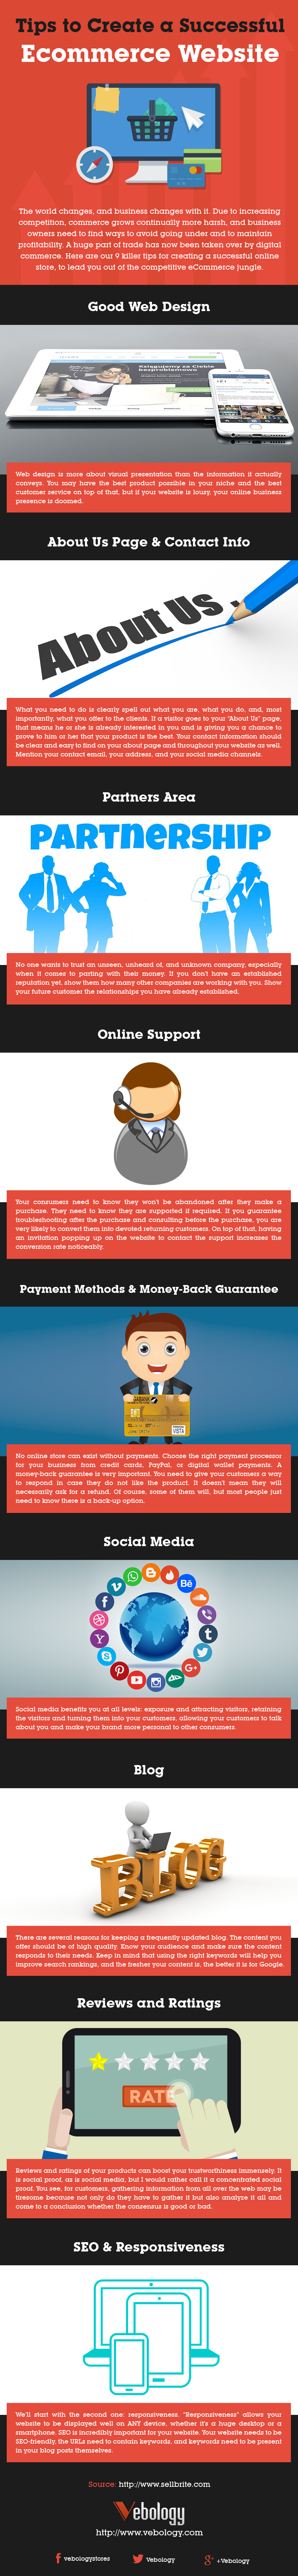 Tips to Create a Successful Ecommerce Website Infographic Techno FAQ